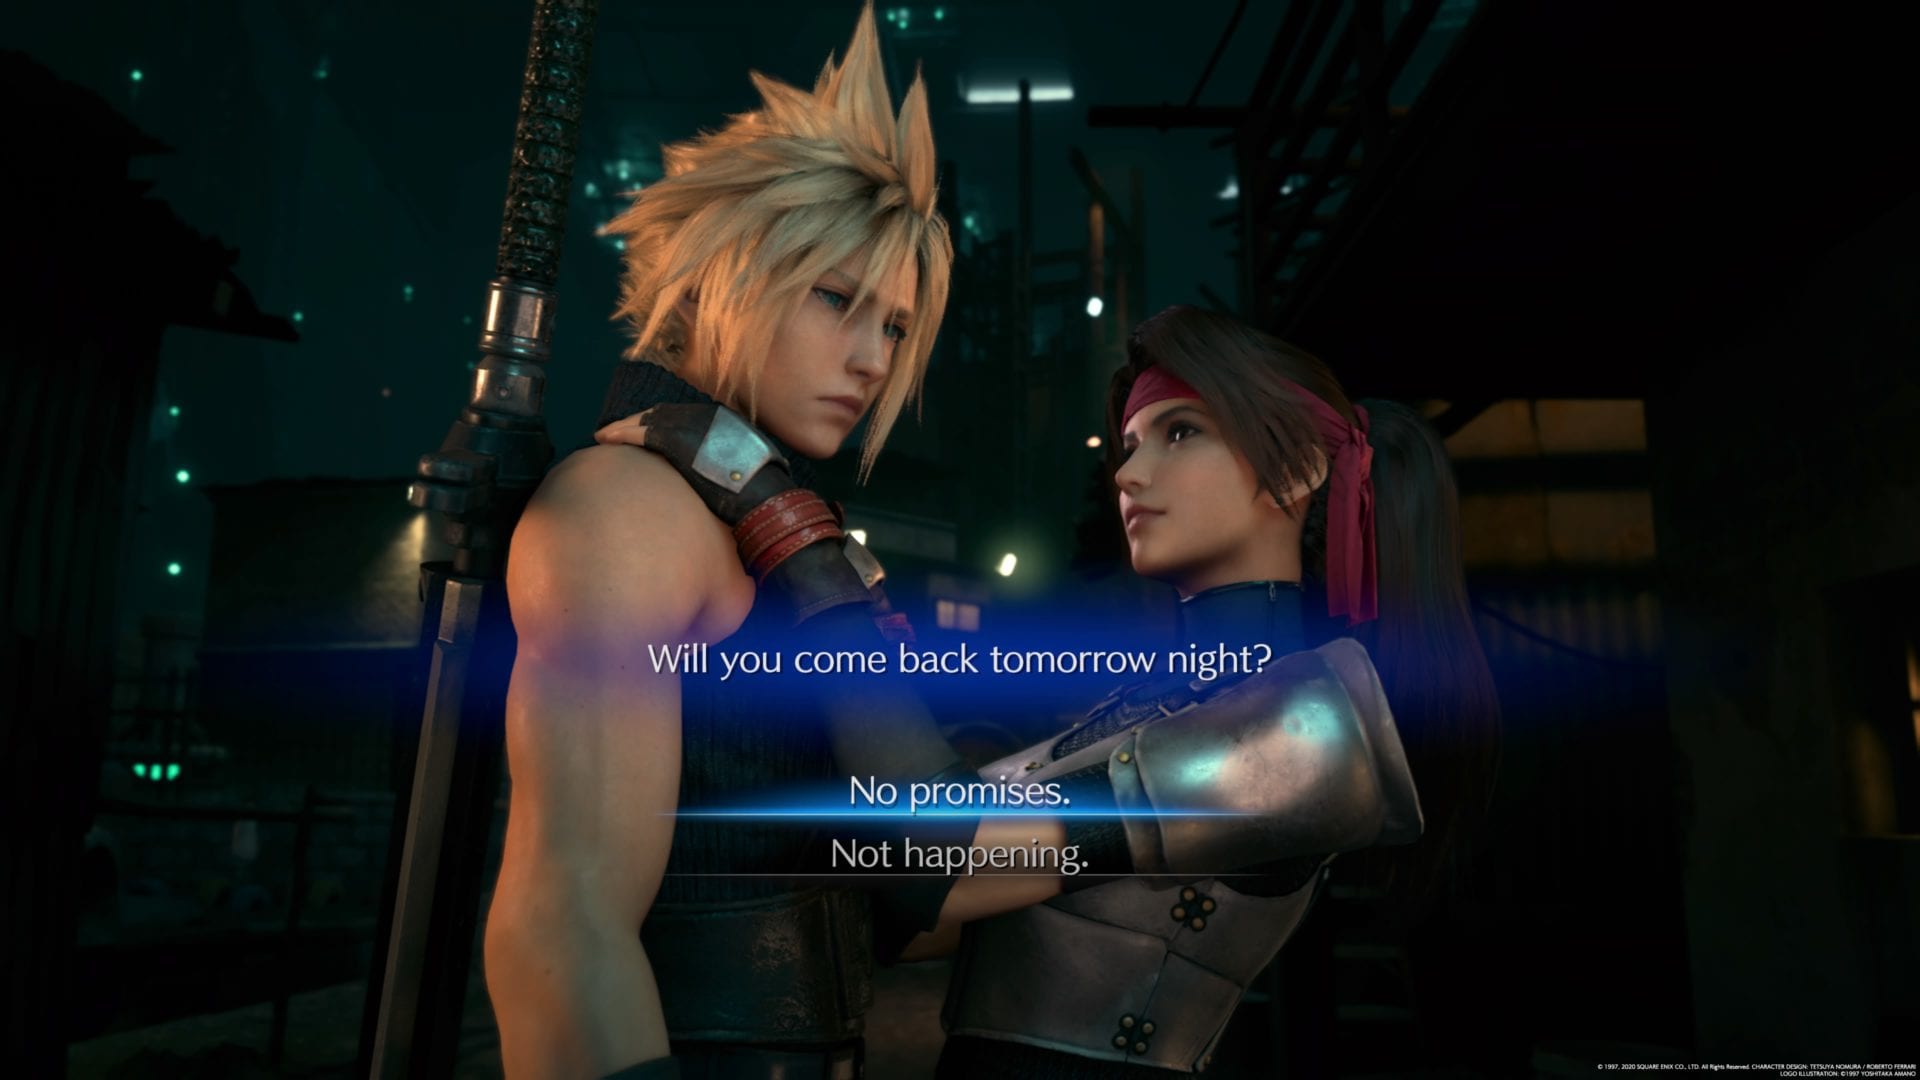 Final Fantasy 7 Remake: What Should You Say to Jesse No Promises